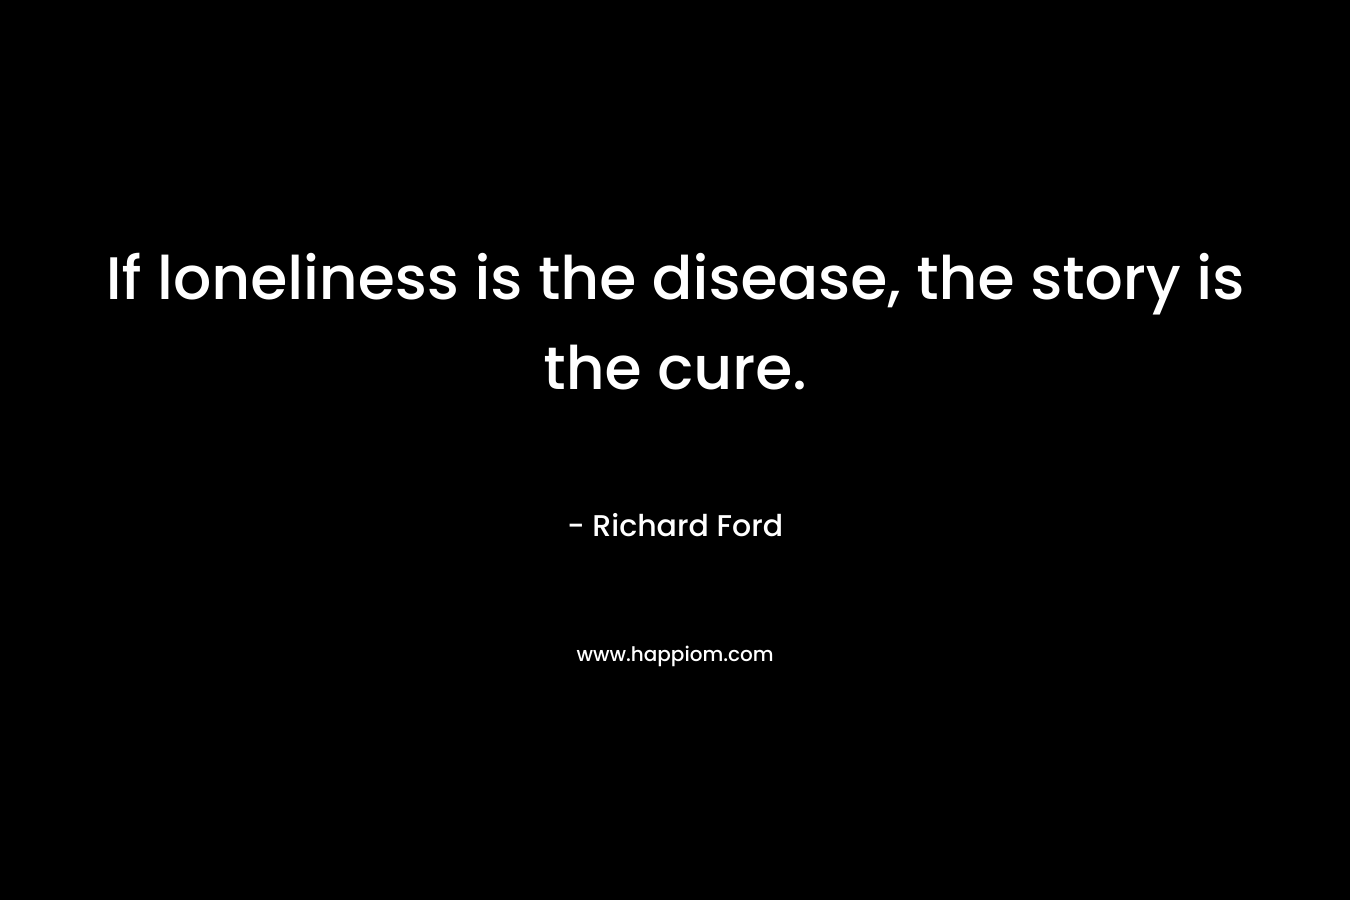 	If loneliness is the disease, the story is the cure.